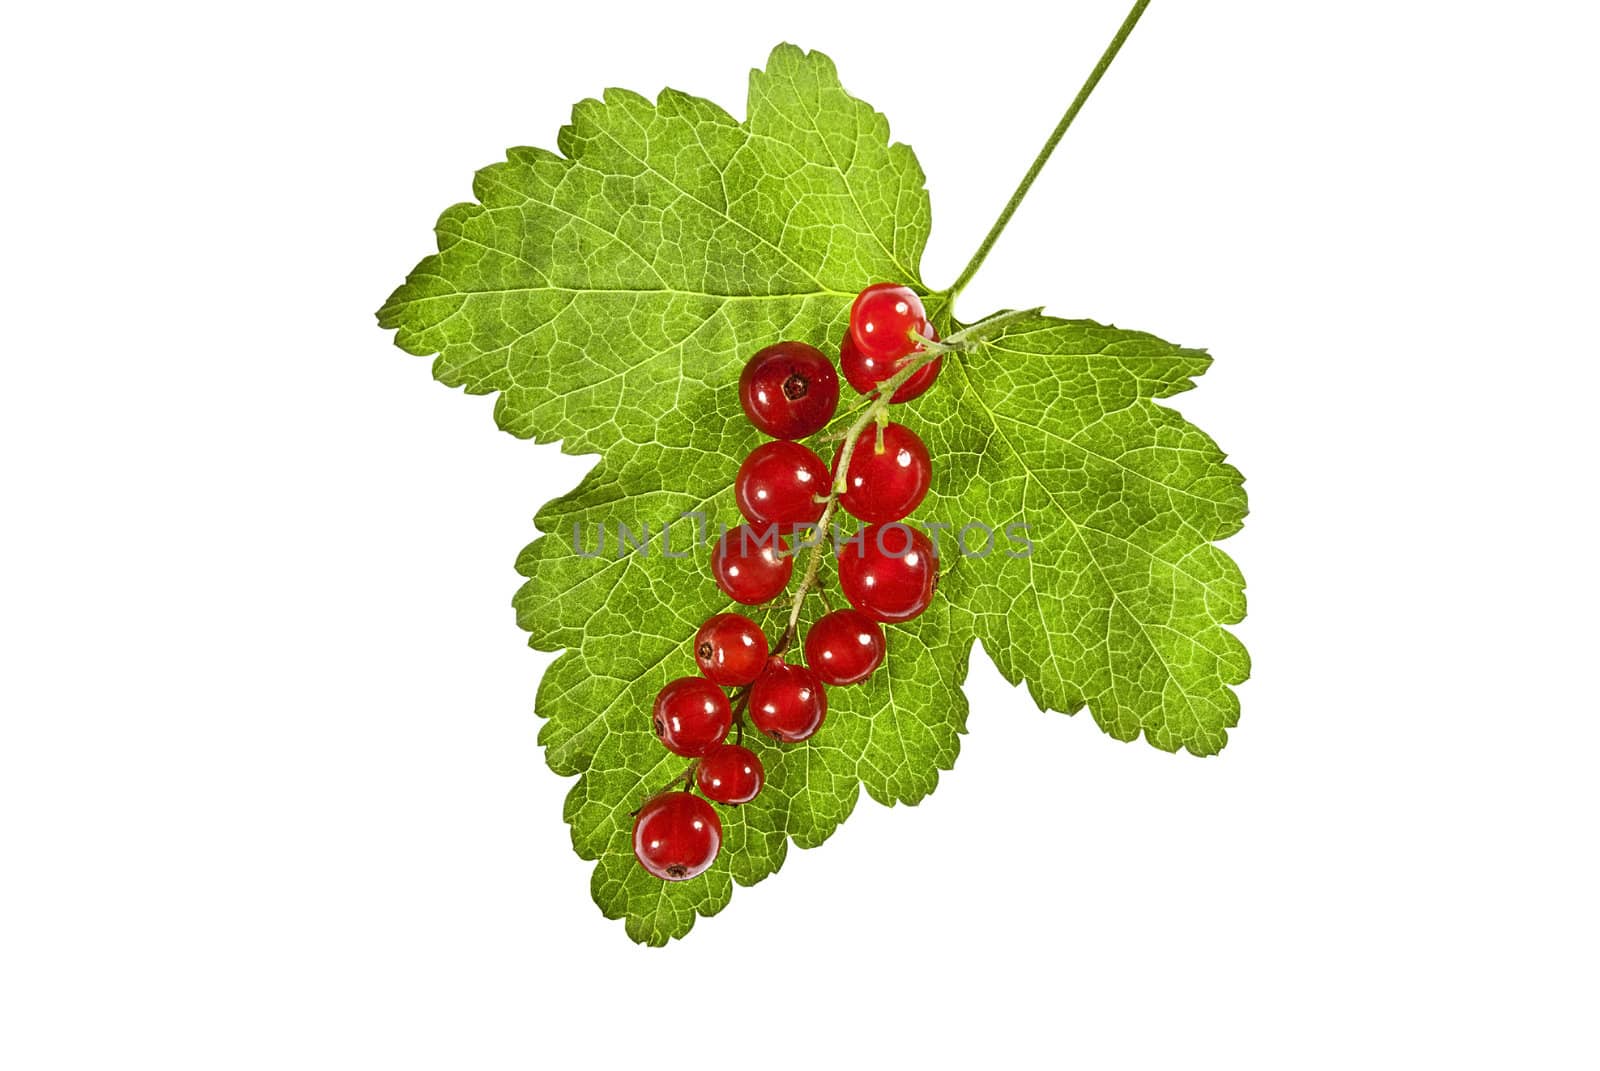 Redcurrant with leaf on a white background.